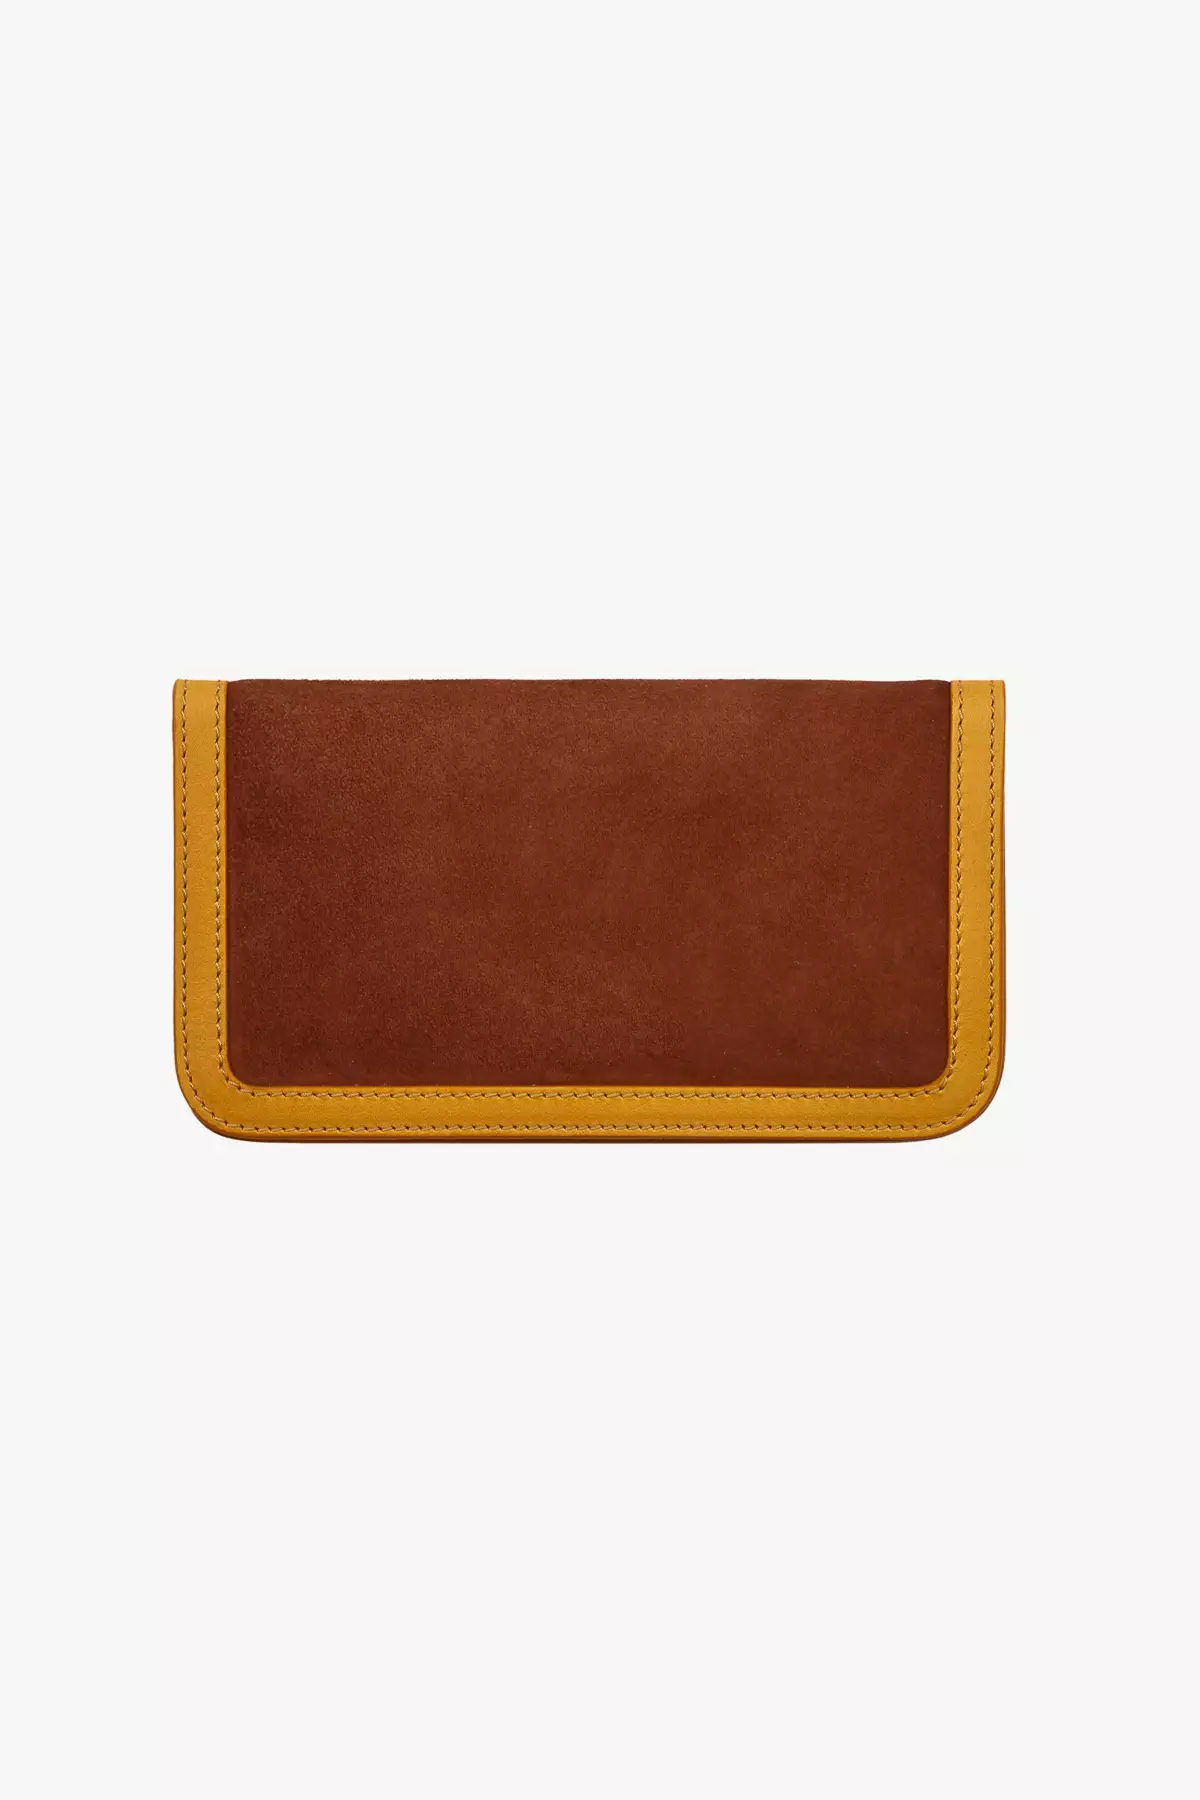 Tobacco Pouch in Leather - Giuliva Heritage